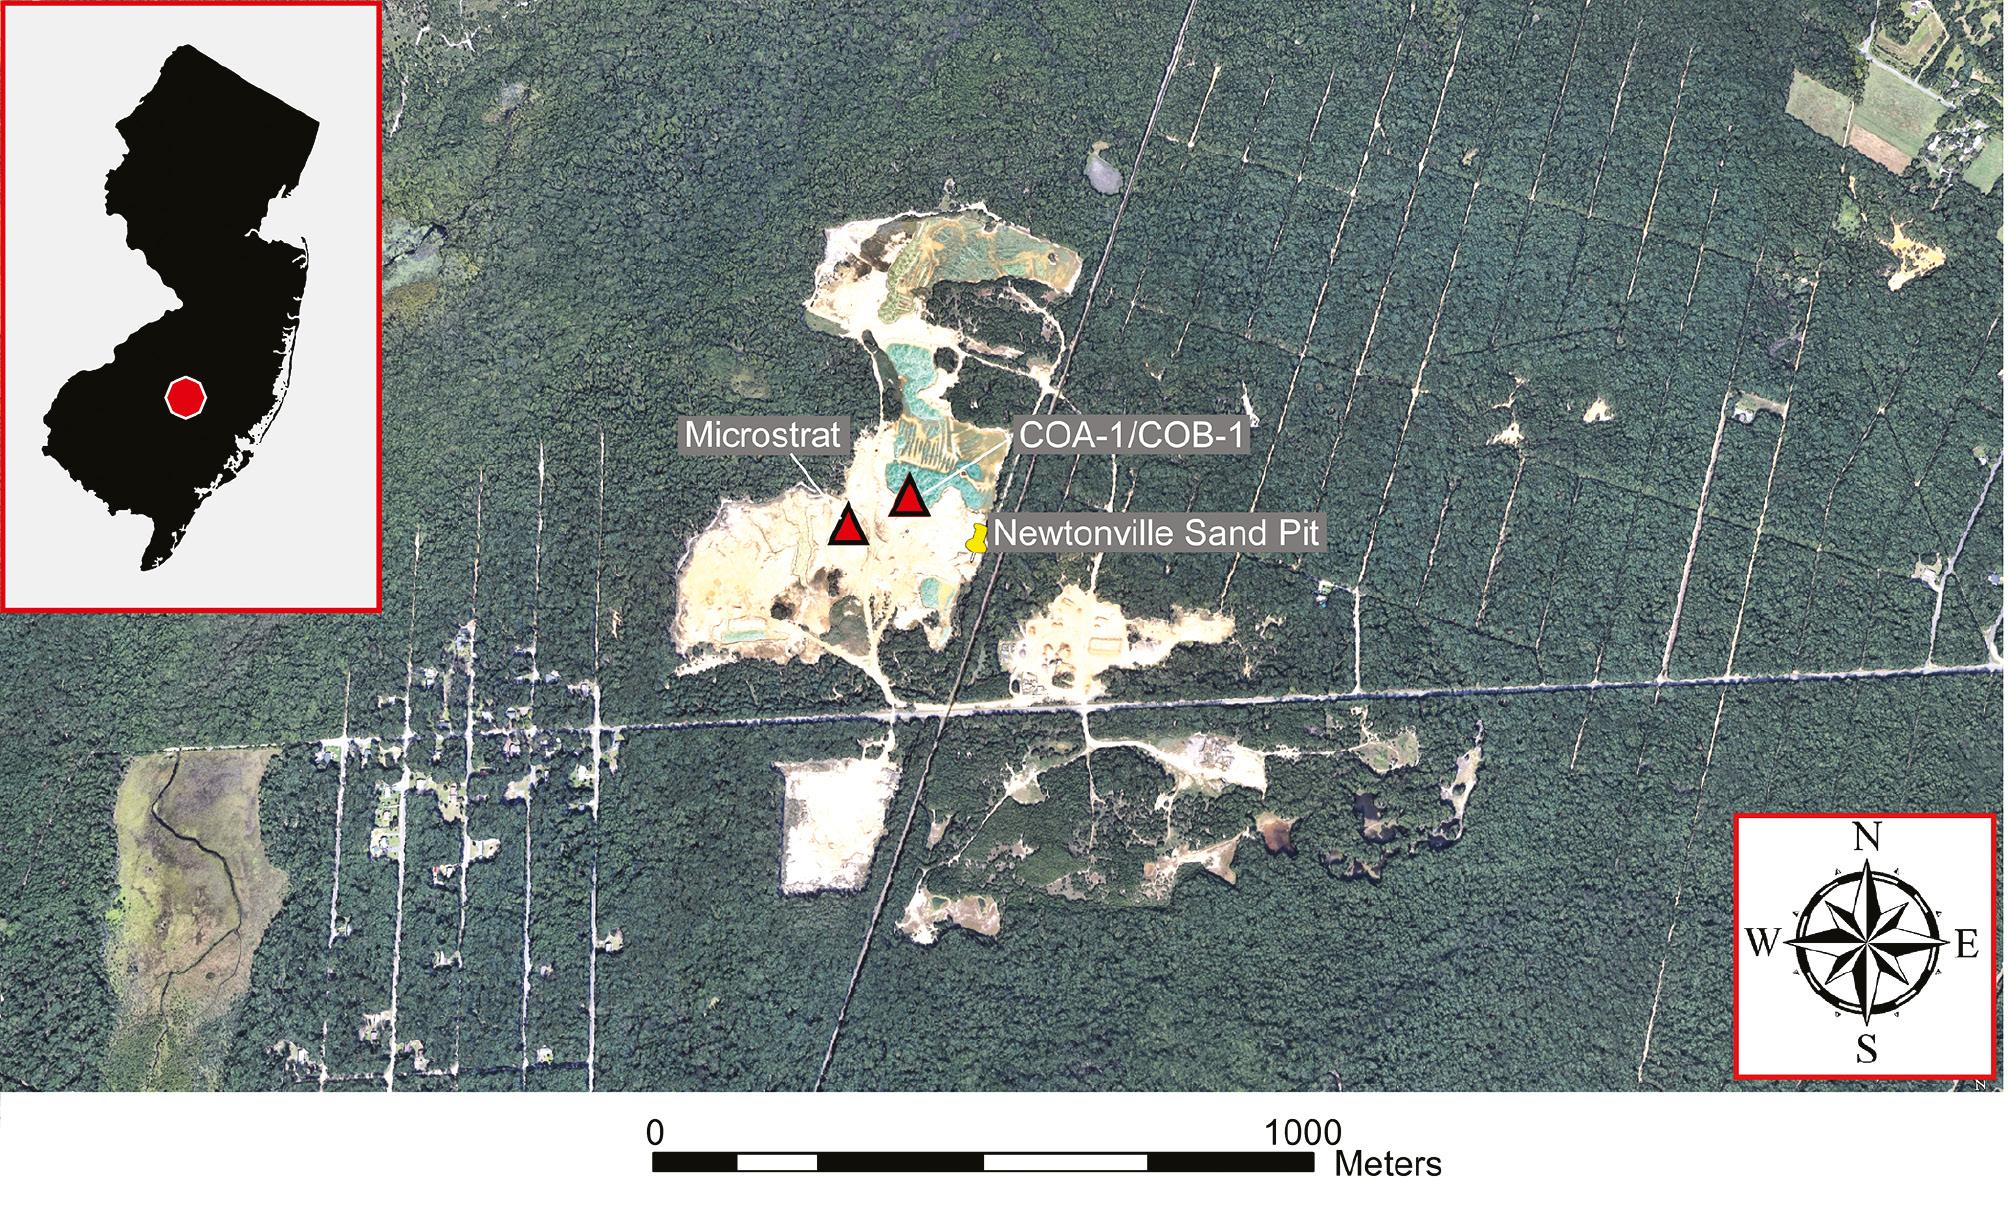 Areas sampled (microstrat and COA-1/COB-1) at Newtonville Sandpit in the New Jersey Pinelands National Reserve (PNR). The image was created using Google Earth and Canvas 11 (Build 1252) software.